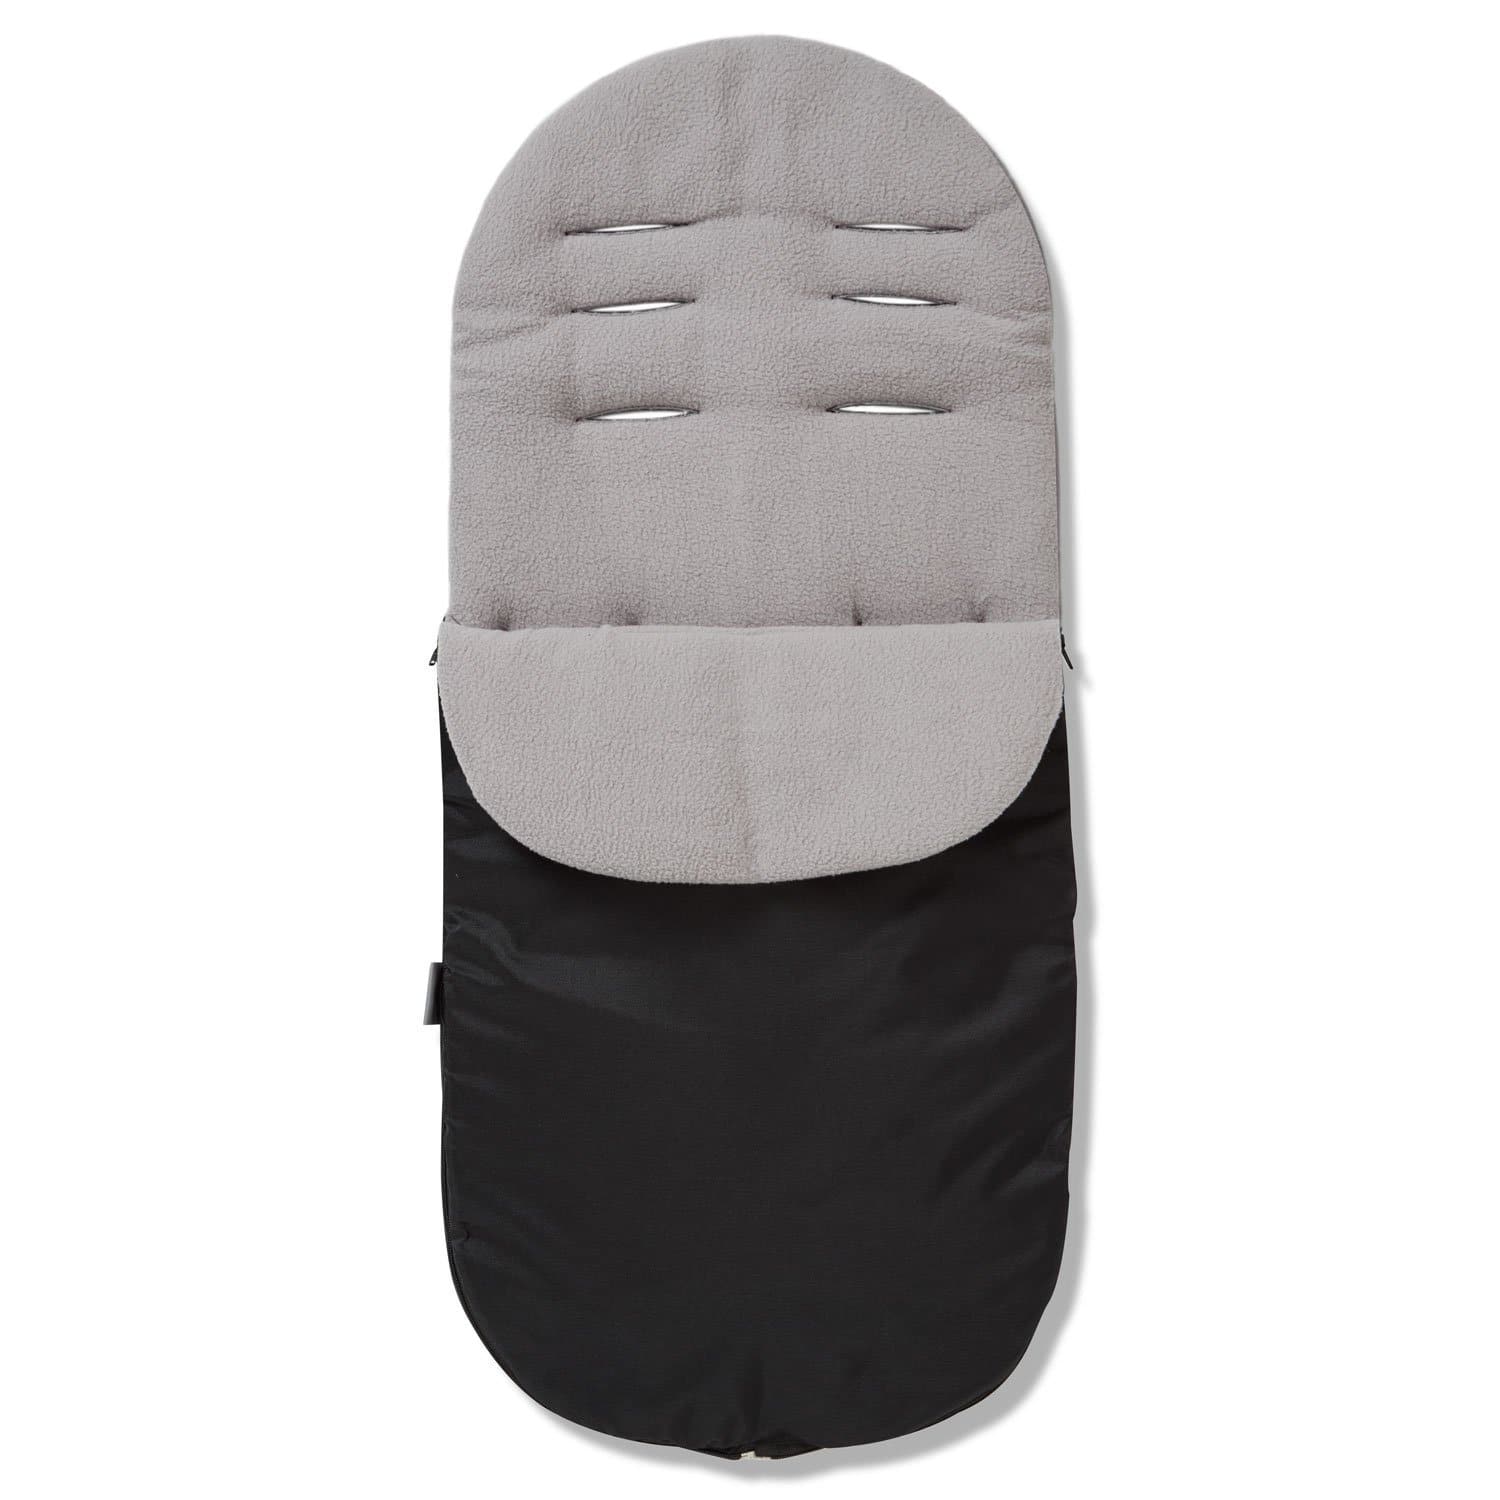 Footmuff / Cosy Toes Compatible with Cam - Grey / Fits All Models | For Your Little One